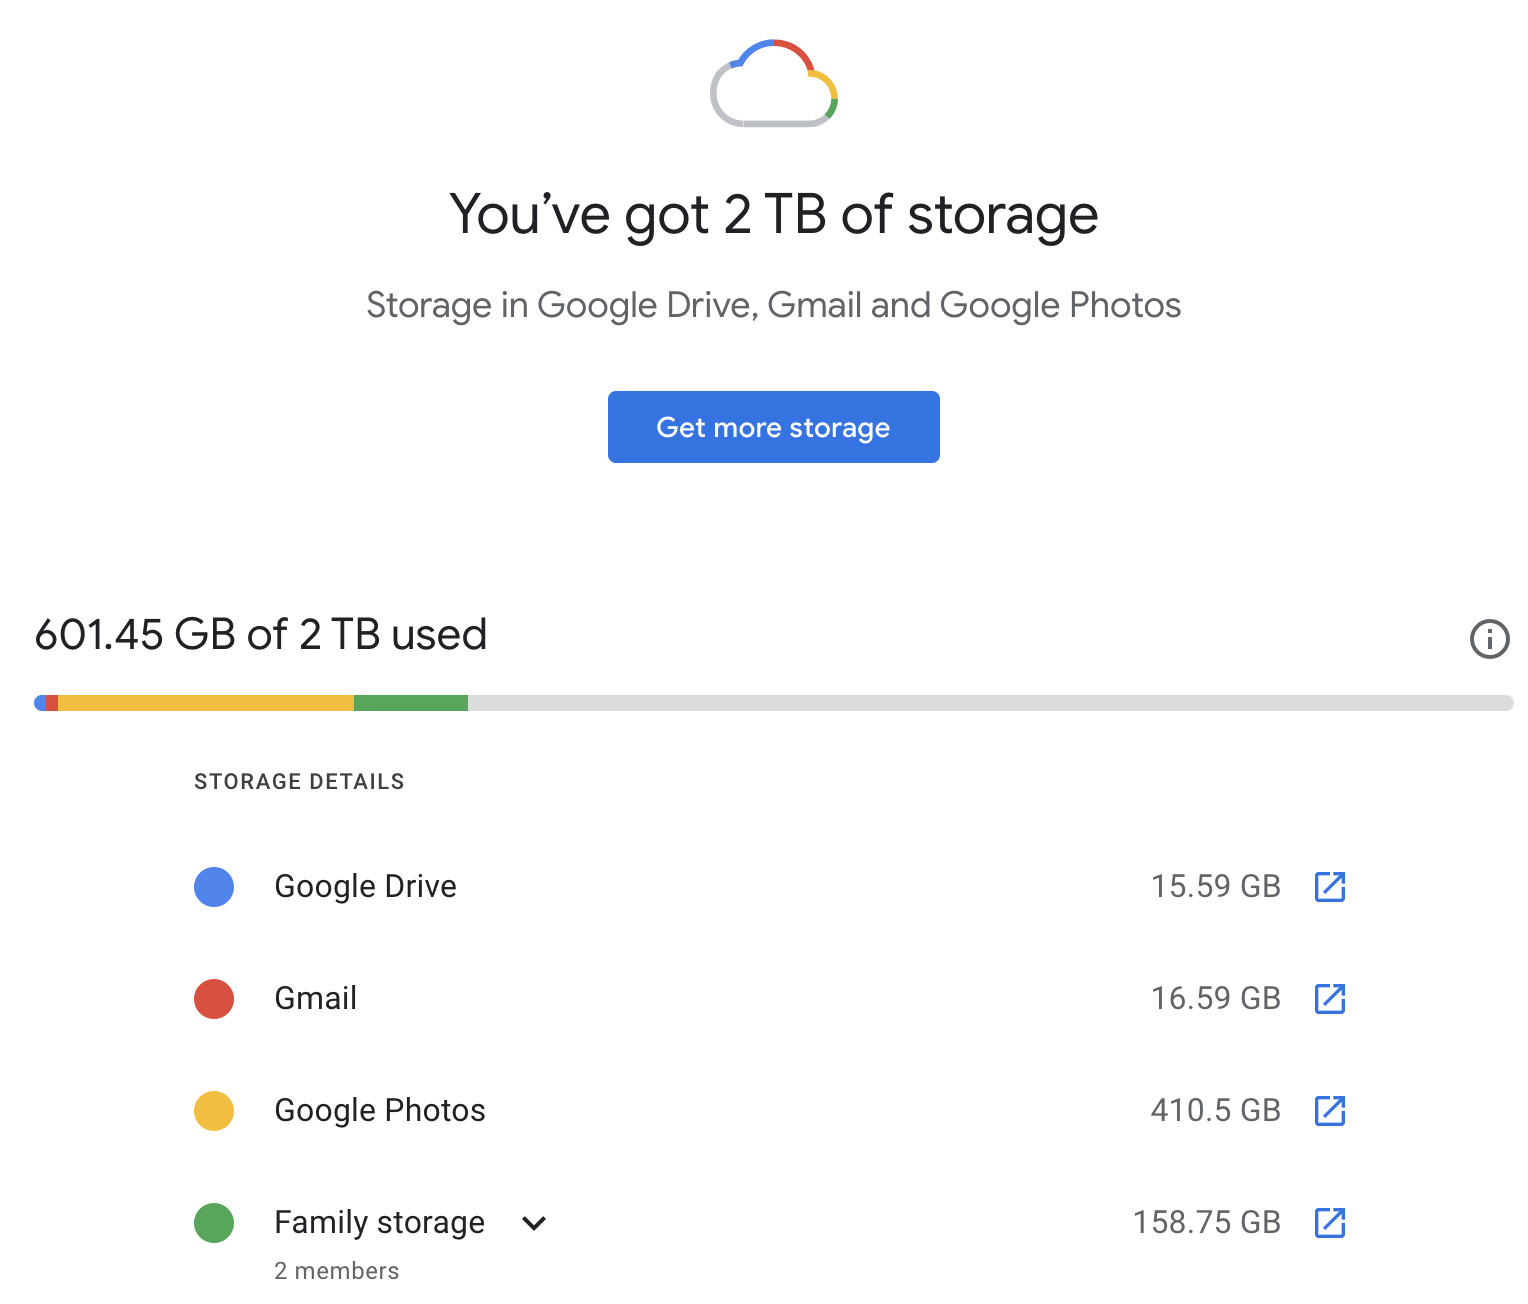 Buy more Google storage - Android - Google Drive Help